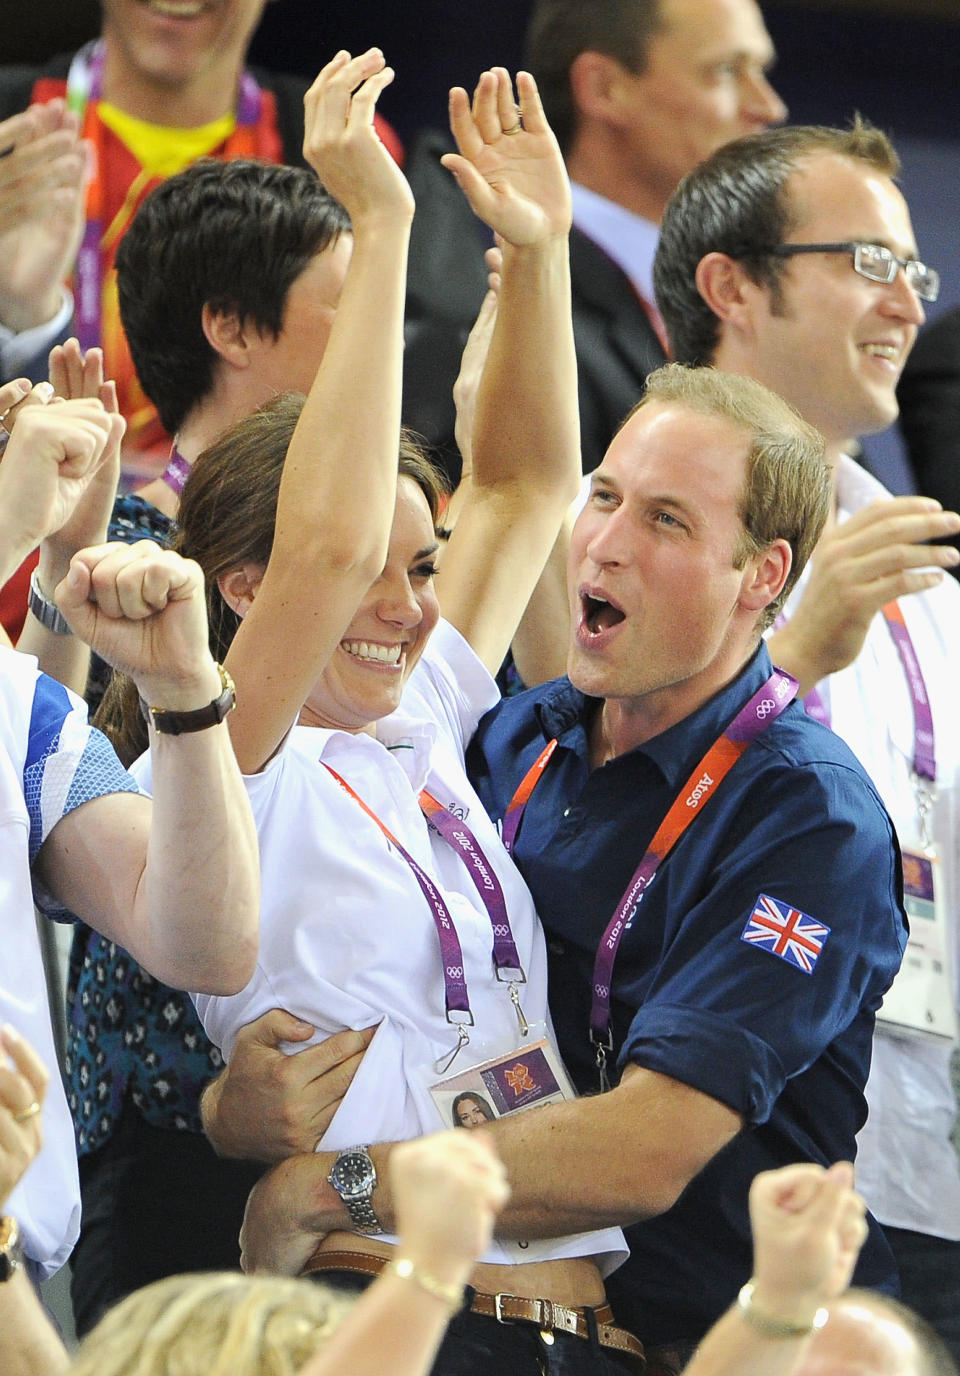 Catherine, Duchess of Cambridge and Prince William, Duke of Cambridge during Day 6 of the London 2012 Olympic Games at Velodrome on August 2, 2012 in London, England. (Photo by Pascal Le Segretain/Getty Images)